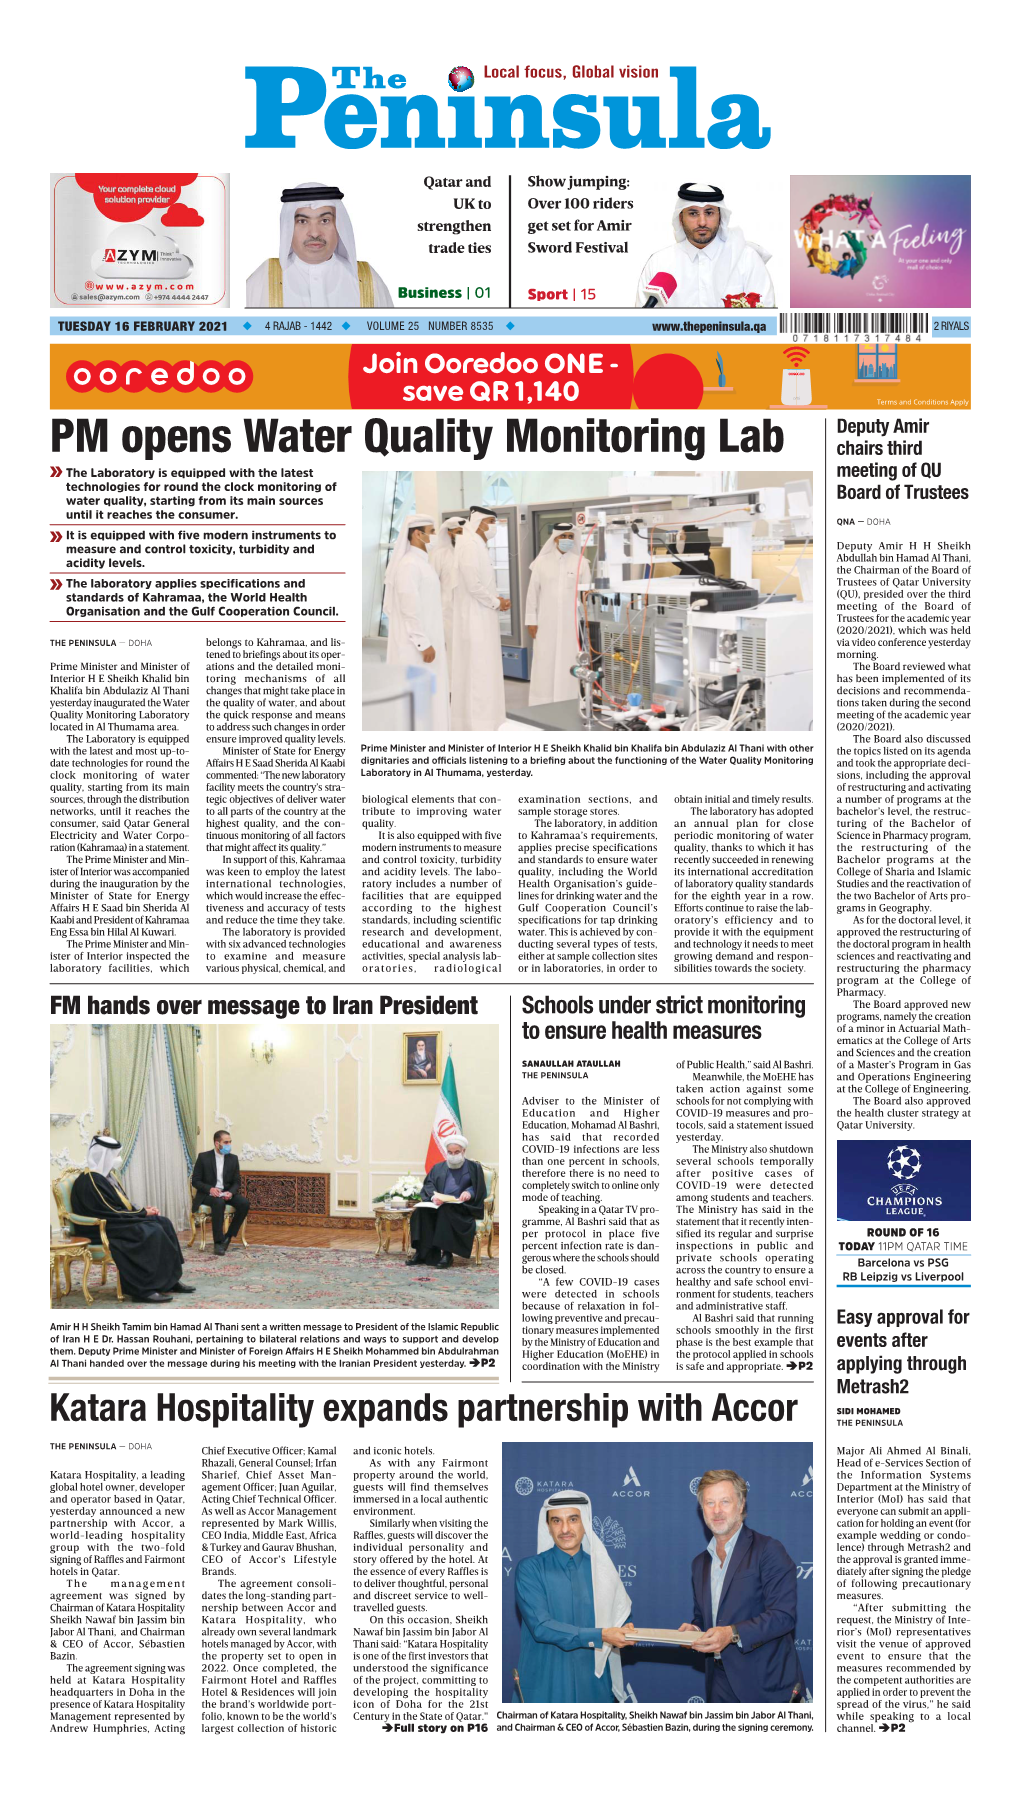 PM Opens Water Quality Monitoring